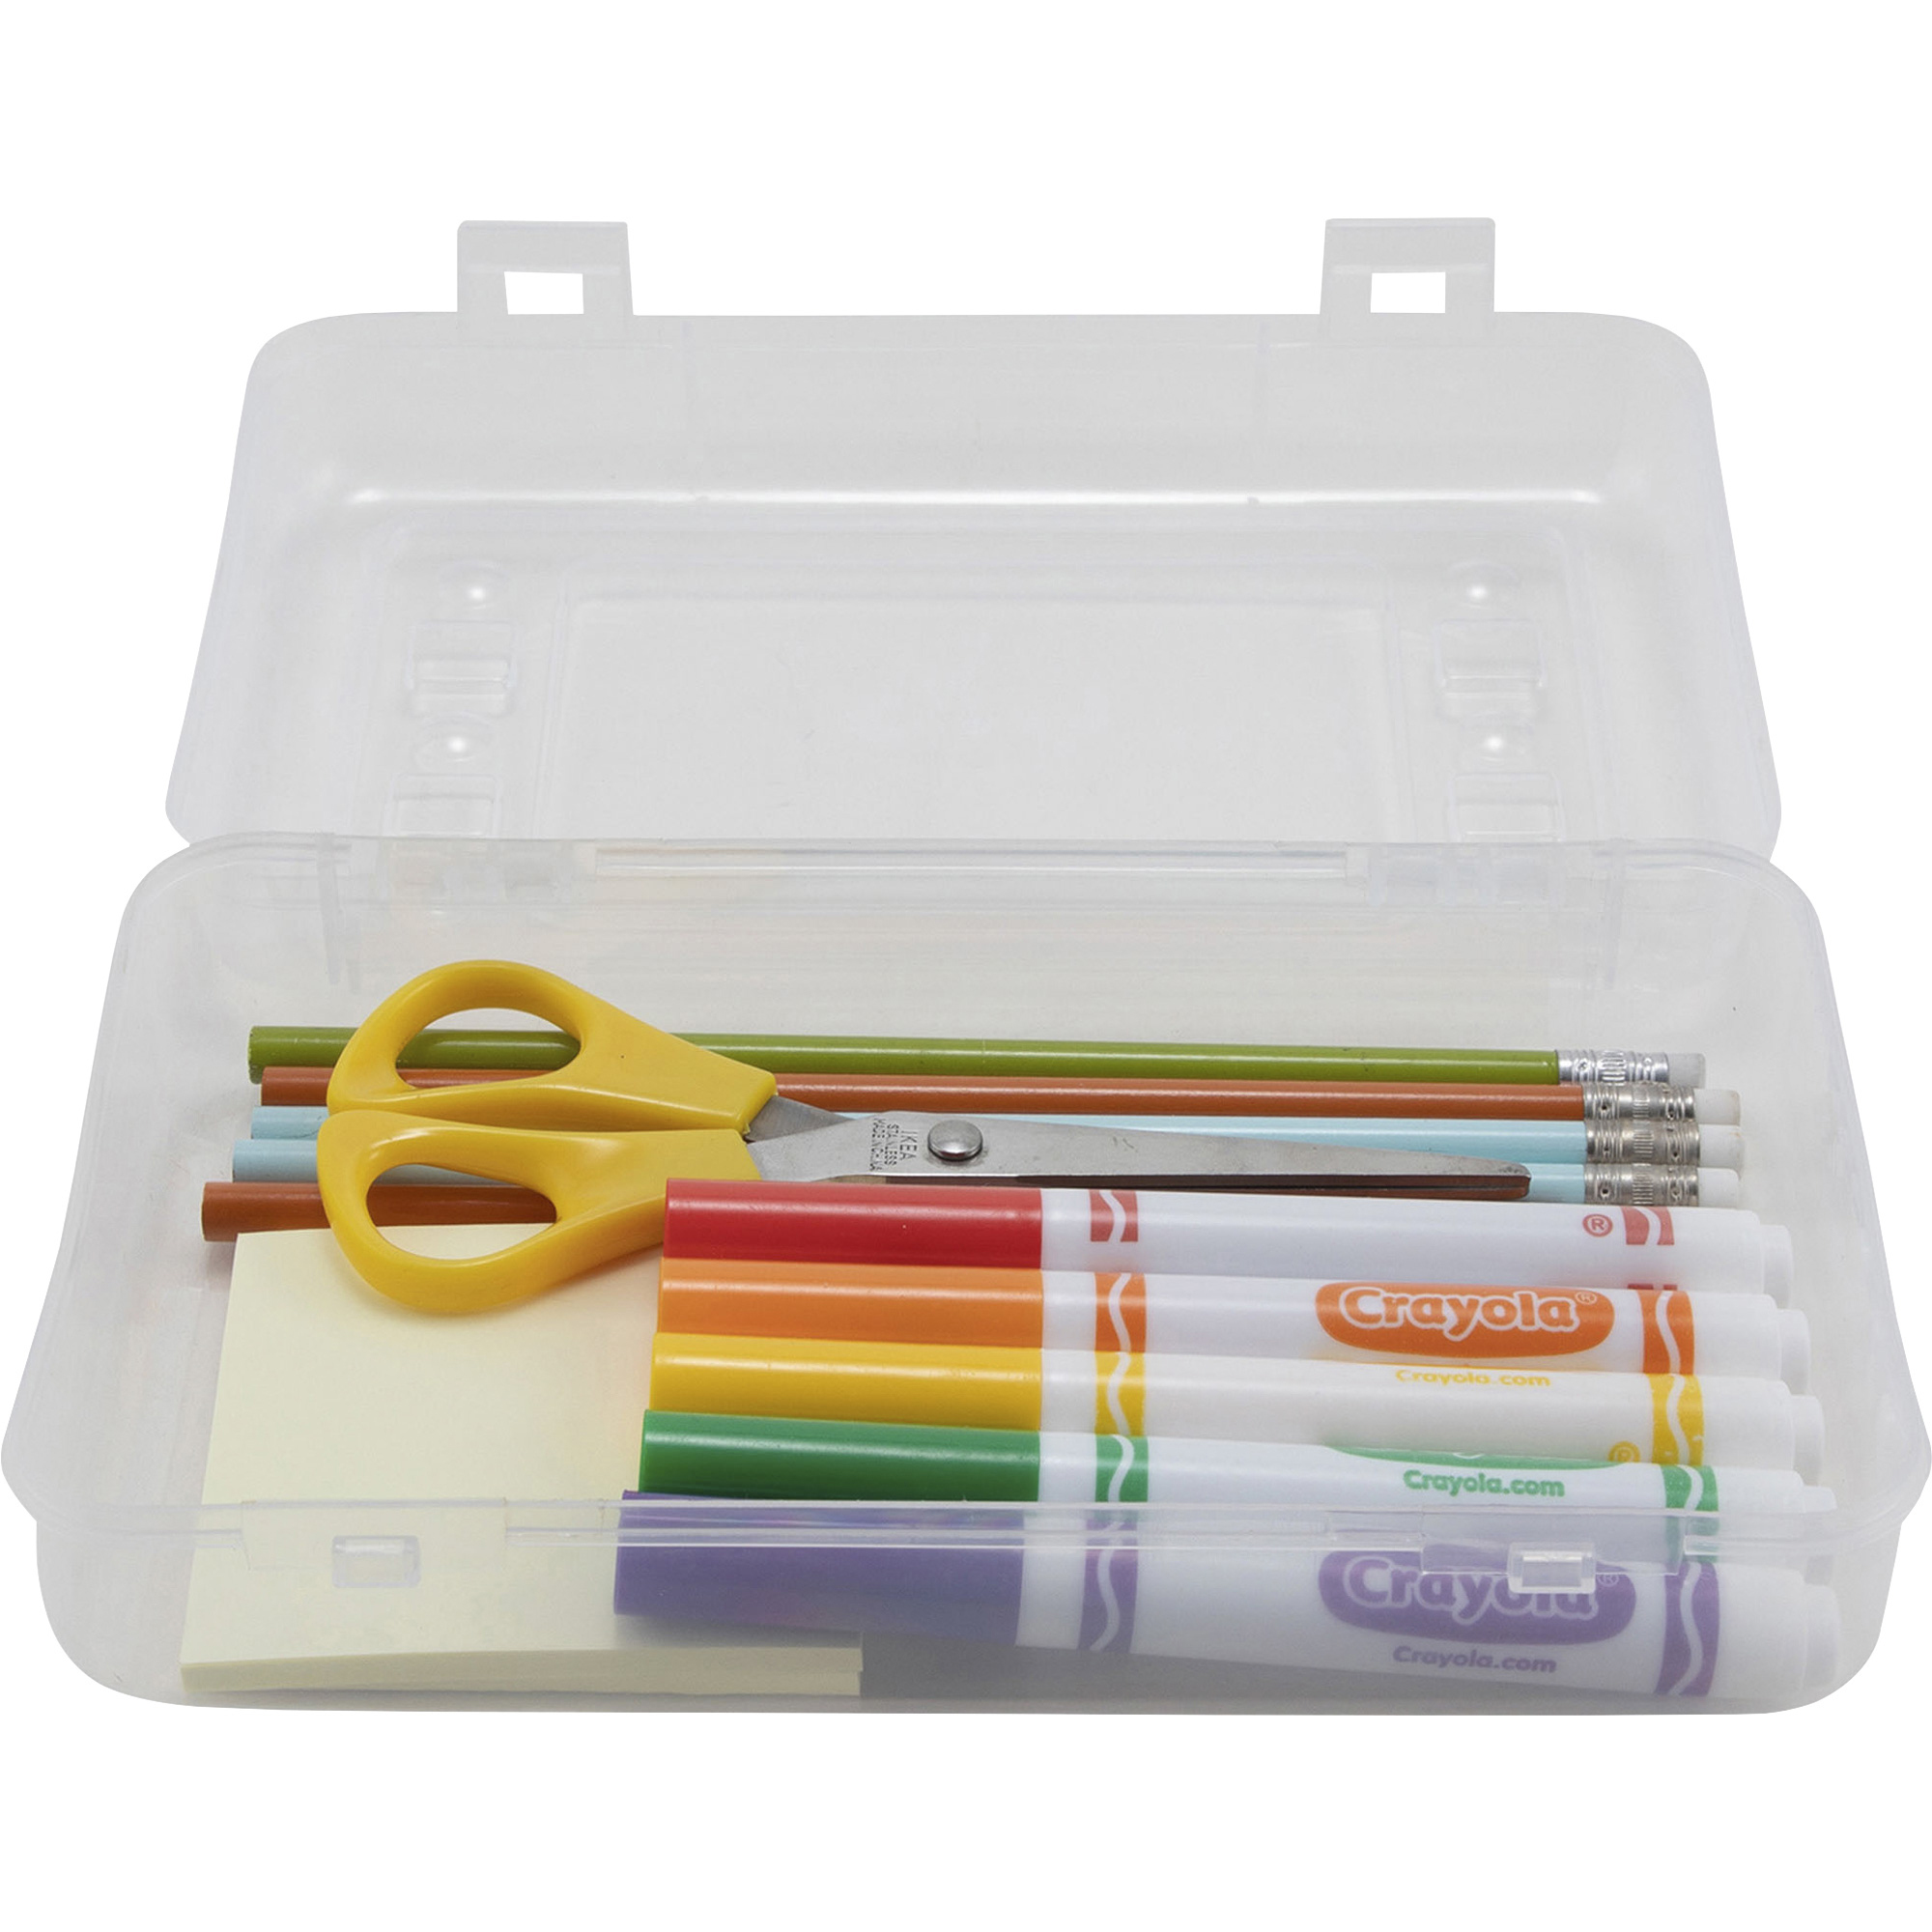 Gem Office Products Clear Pencil Box - External Dimensions: 8.5 Width x  5.5 Depth x 2.5 Height - Hinged Closure - Polypropylene - Clear - For Pen/ Pencil - 1 Each